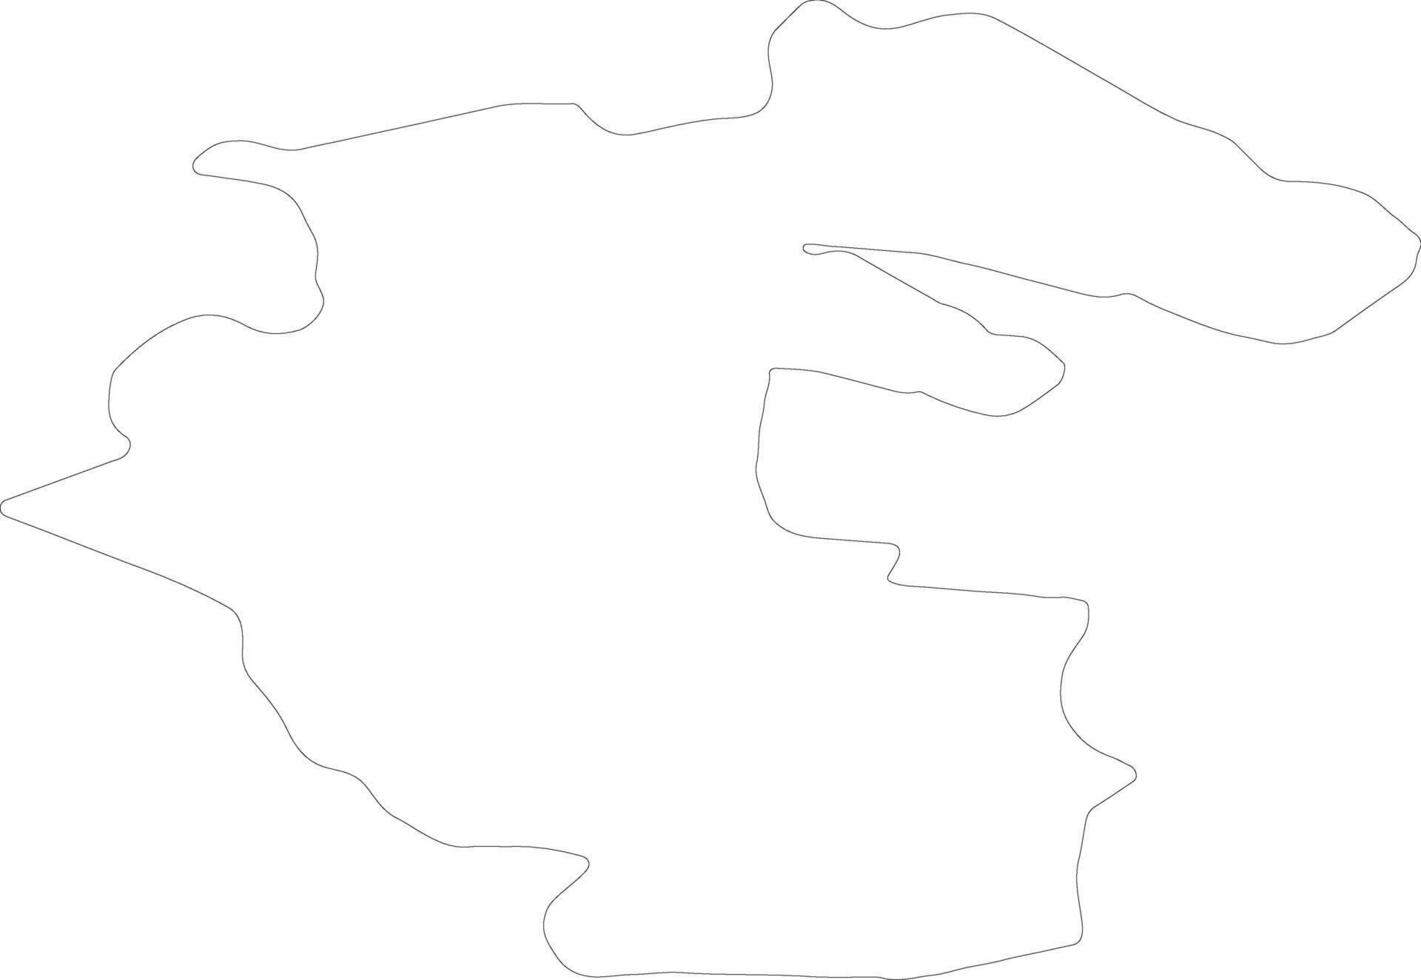 Louth Ireland outline map vector